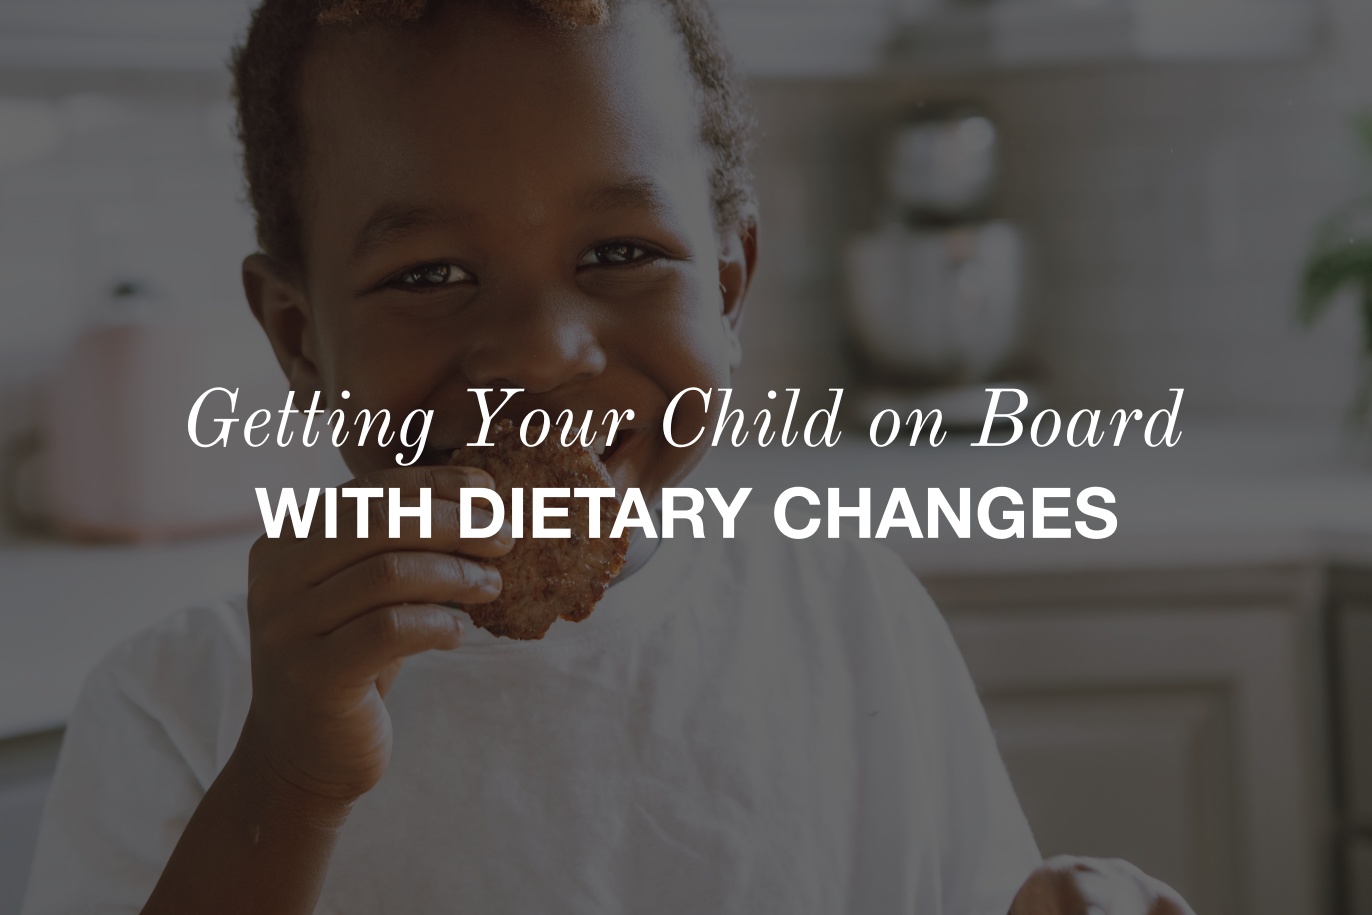 Getting Your Child on Board with Dietary Changes: Advice from an NTP